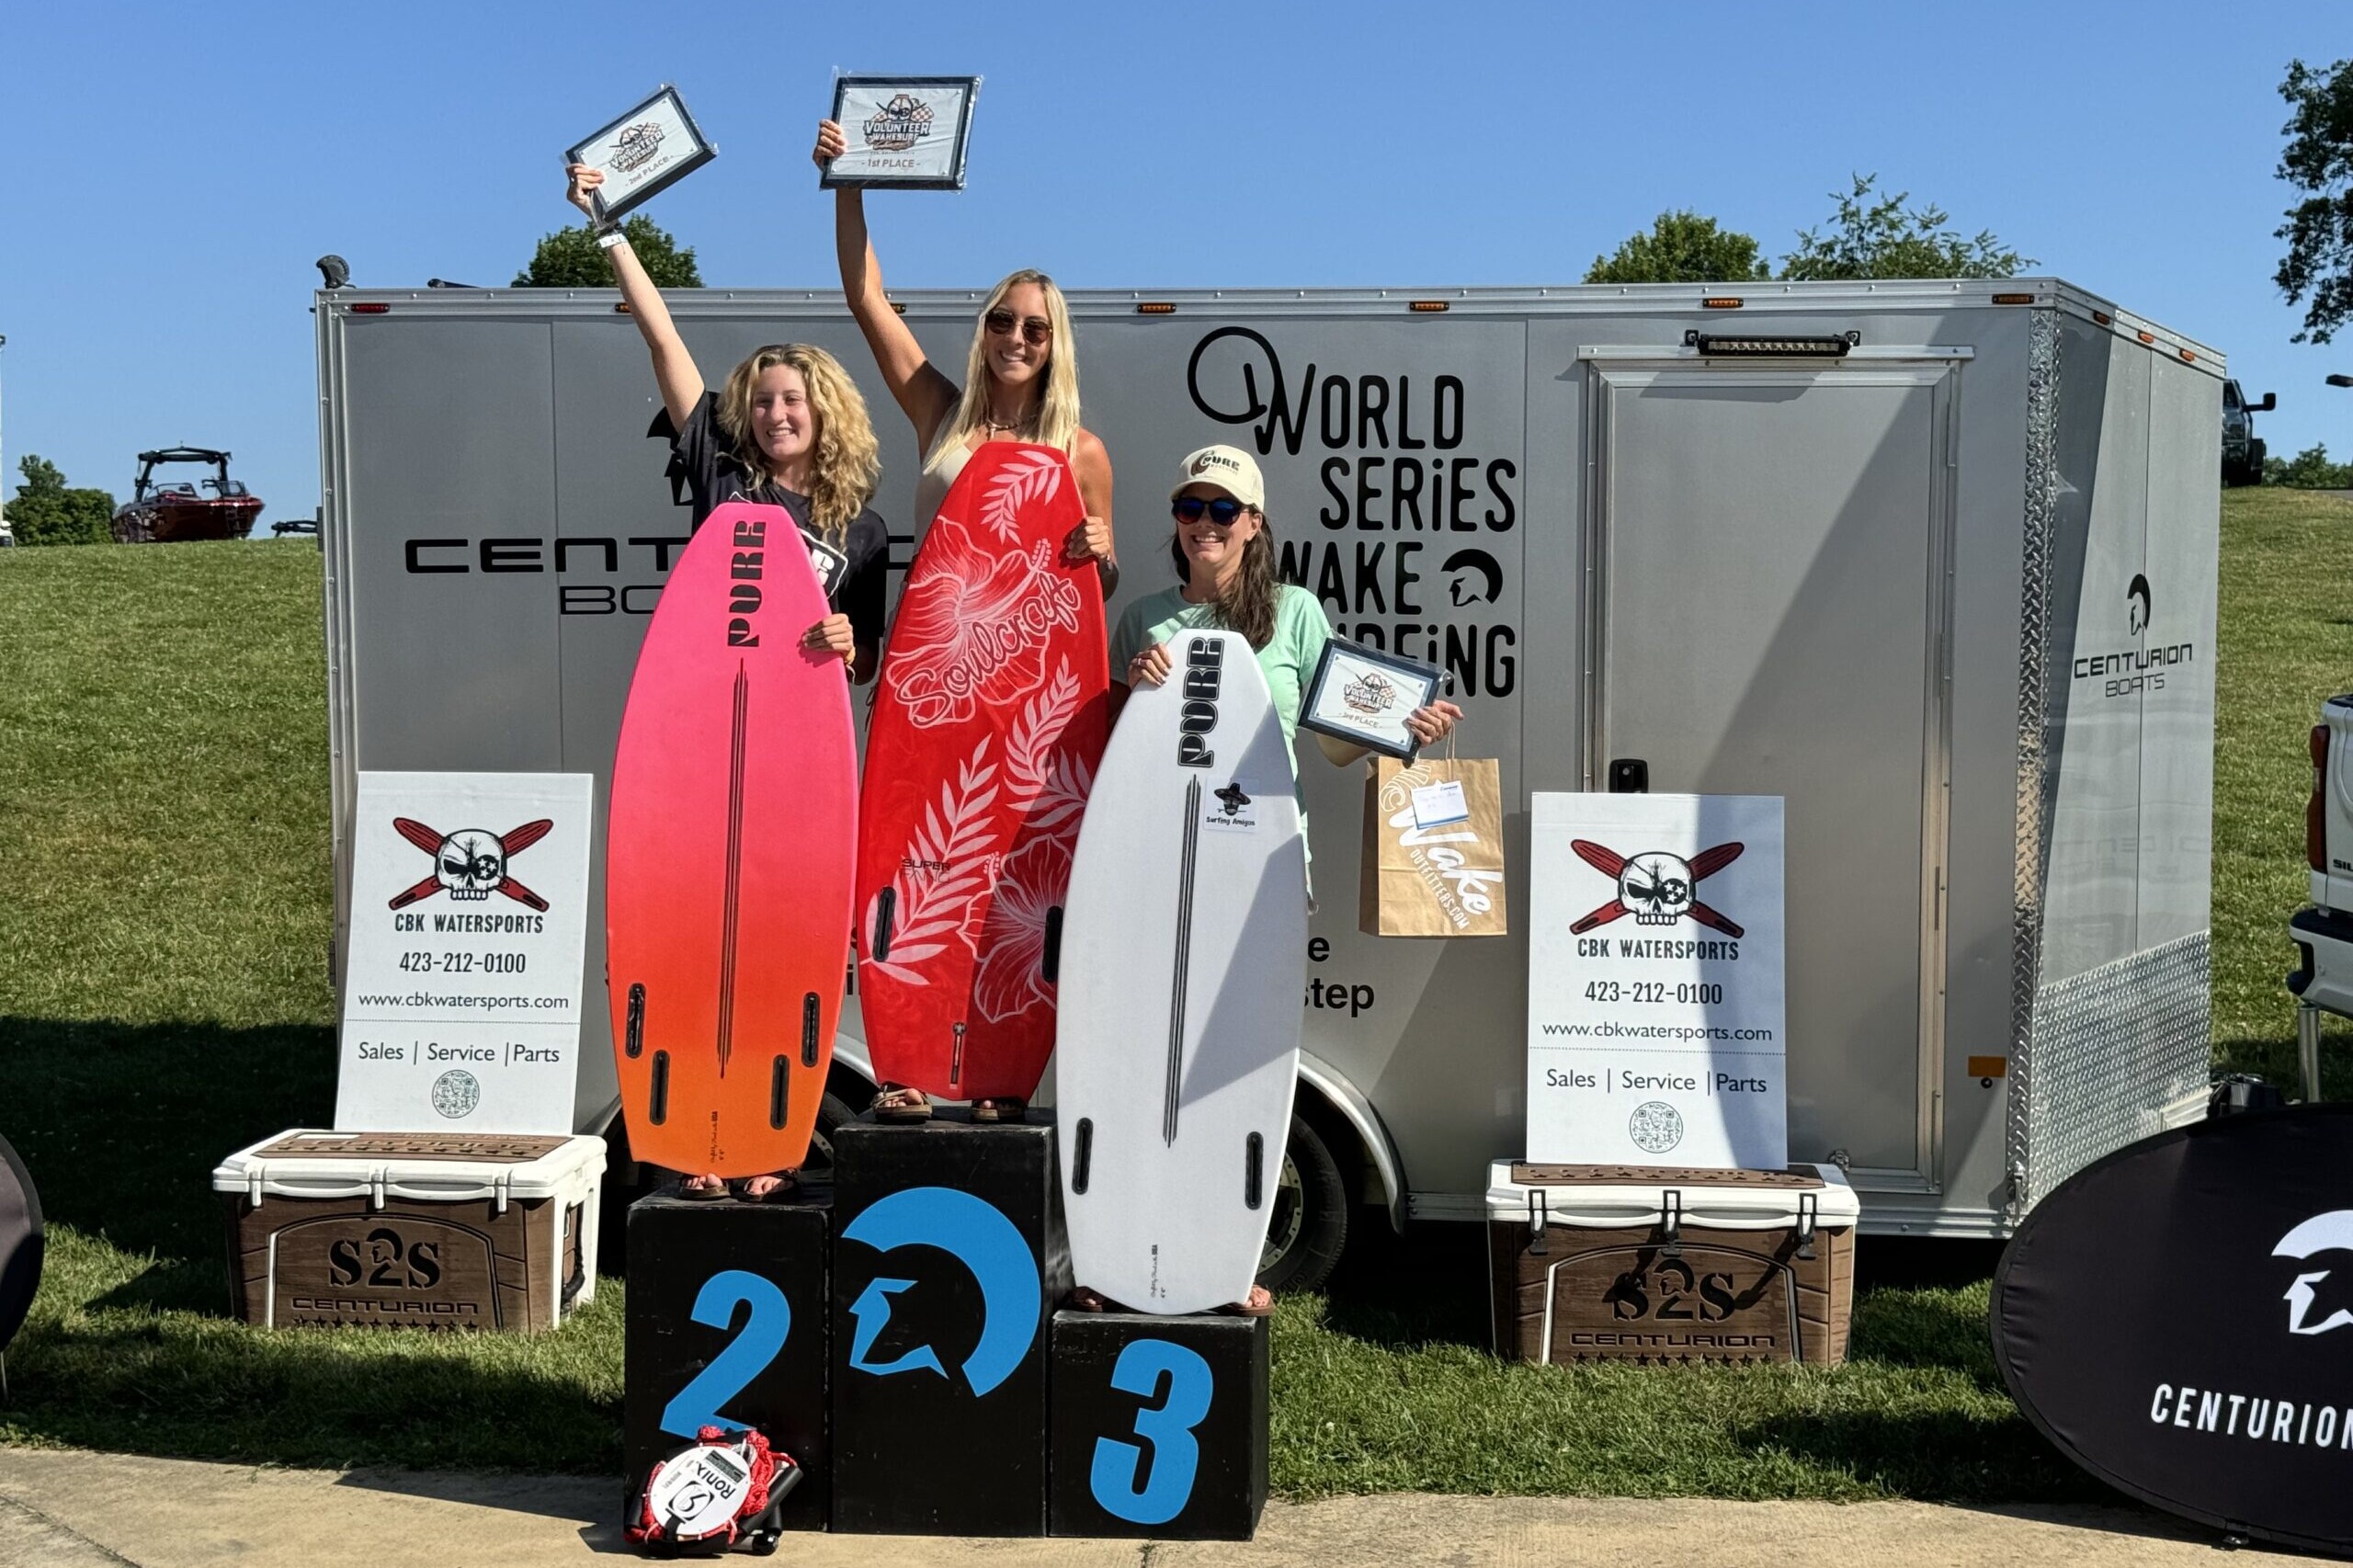 Three individuals stand on podiums labeled 1, 2, and 3, holding certificates and surfboards. A trailer behind them displays 